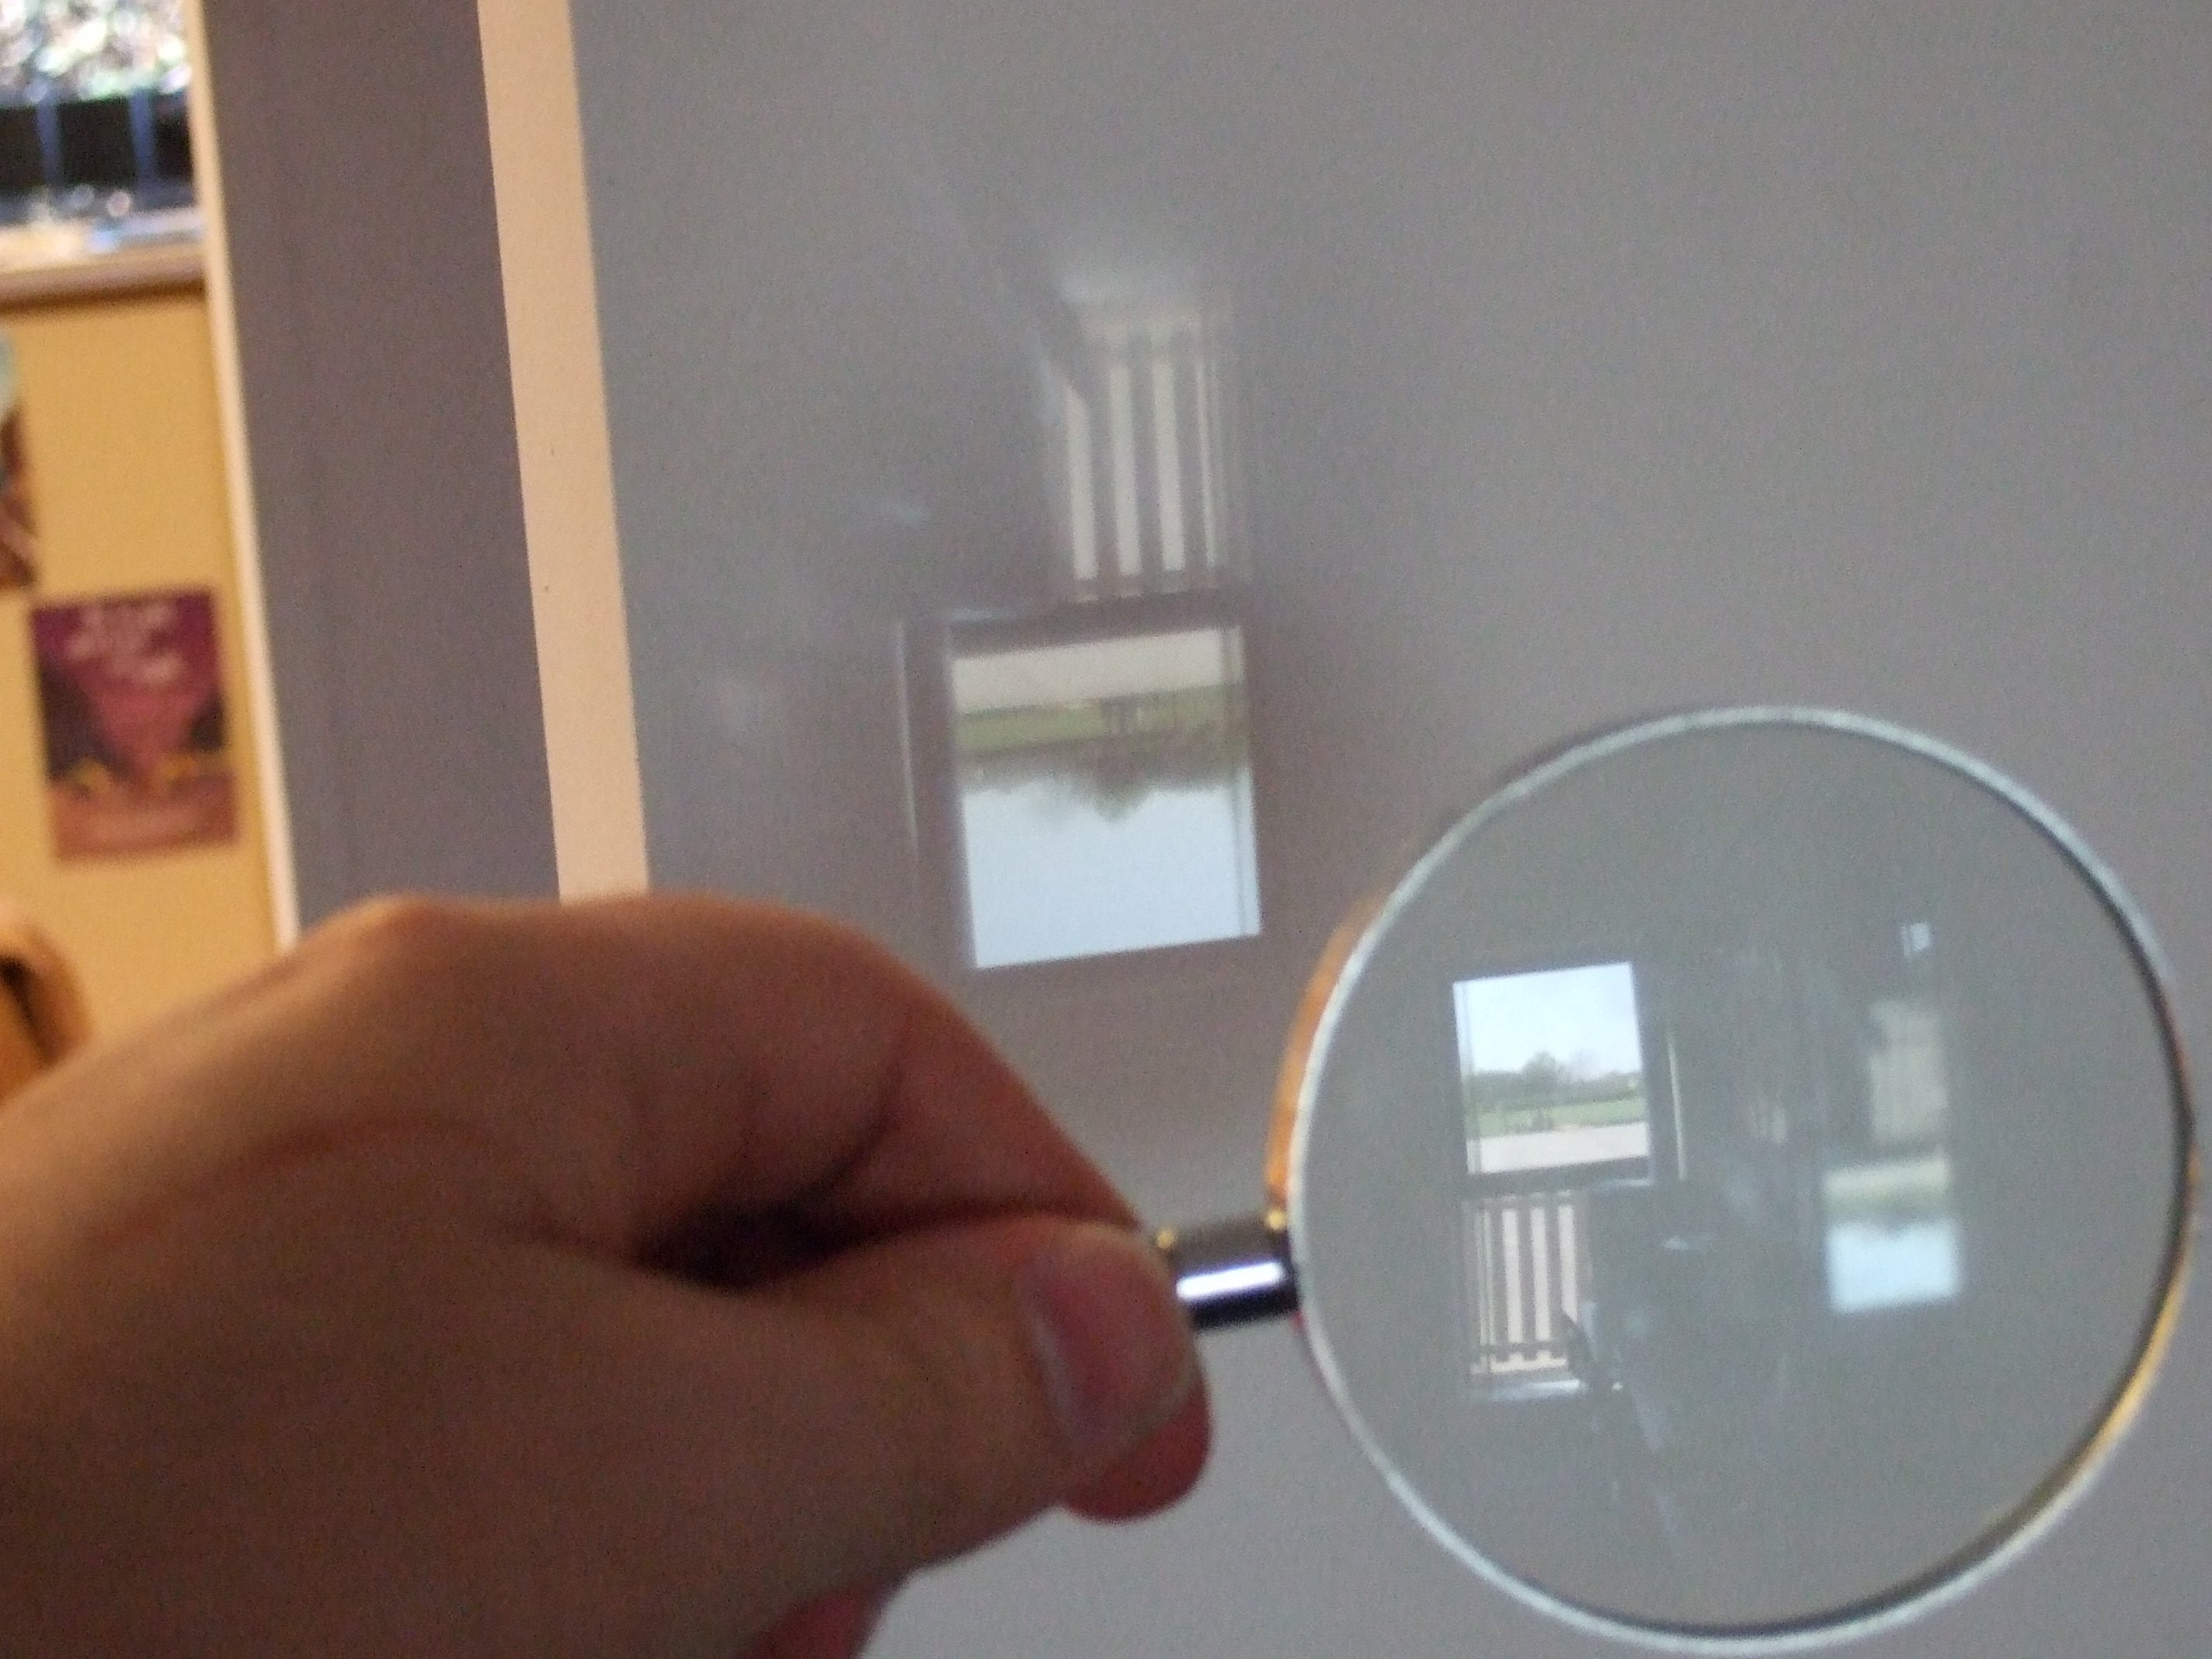 The image from a magnifying glass